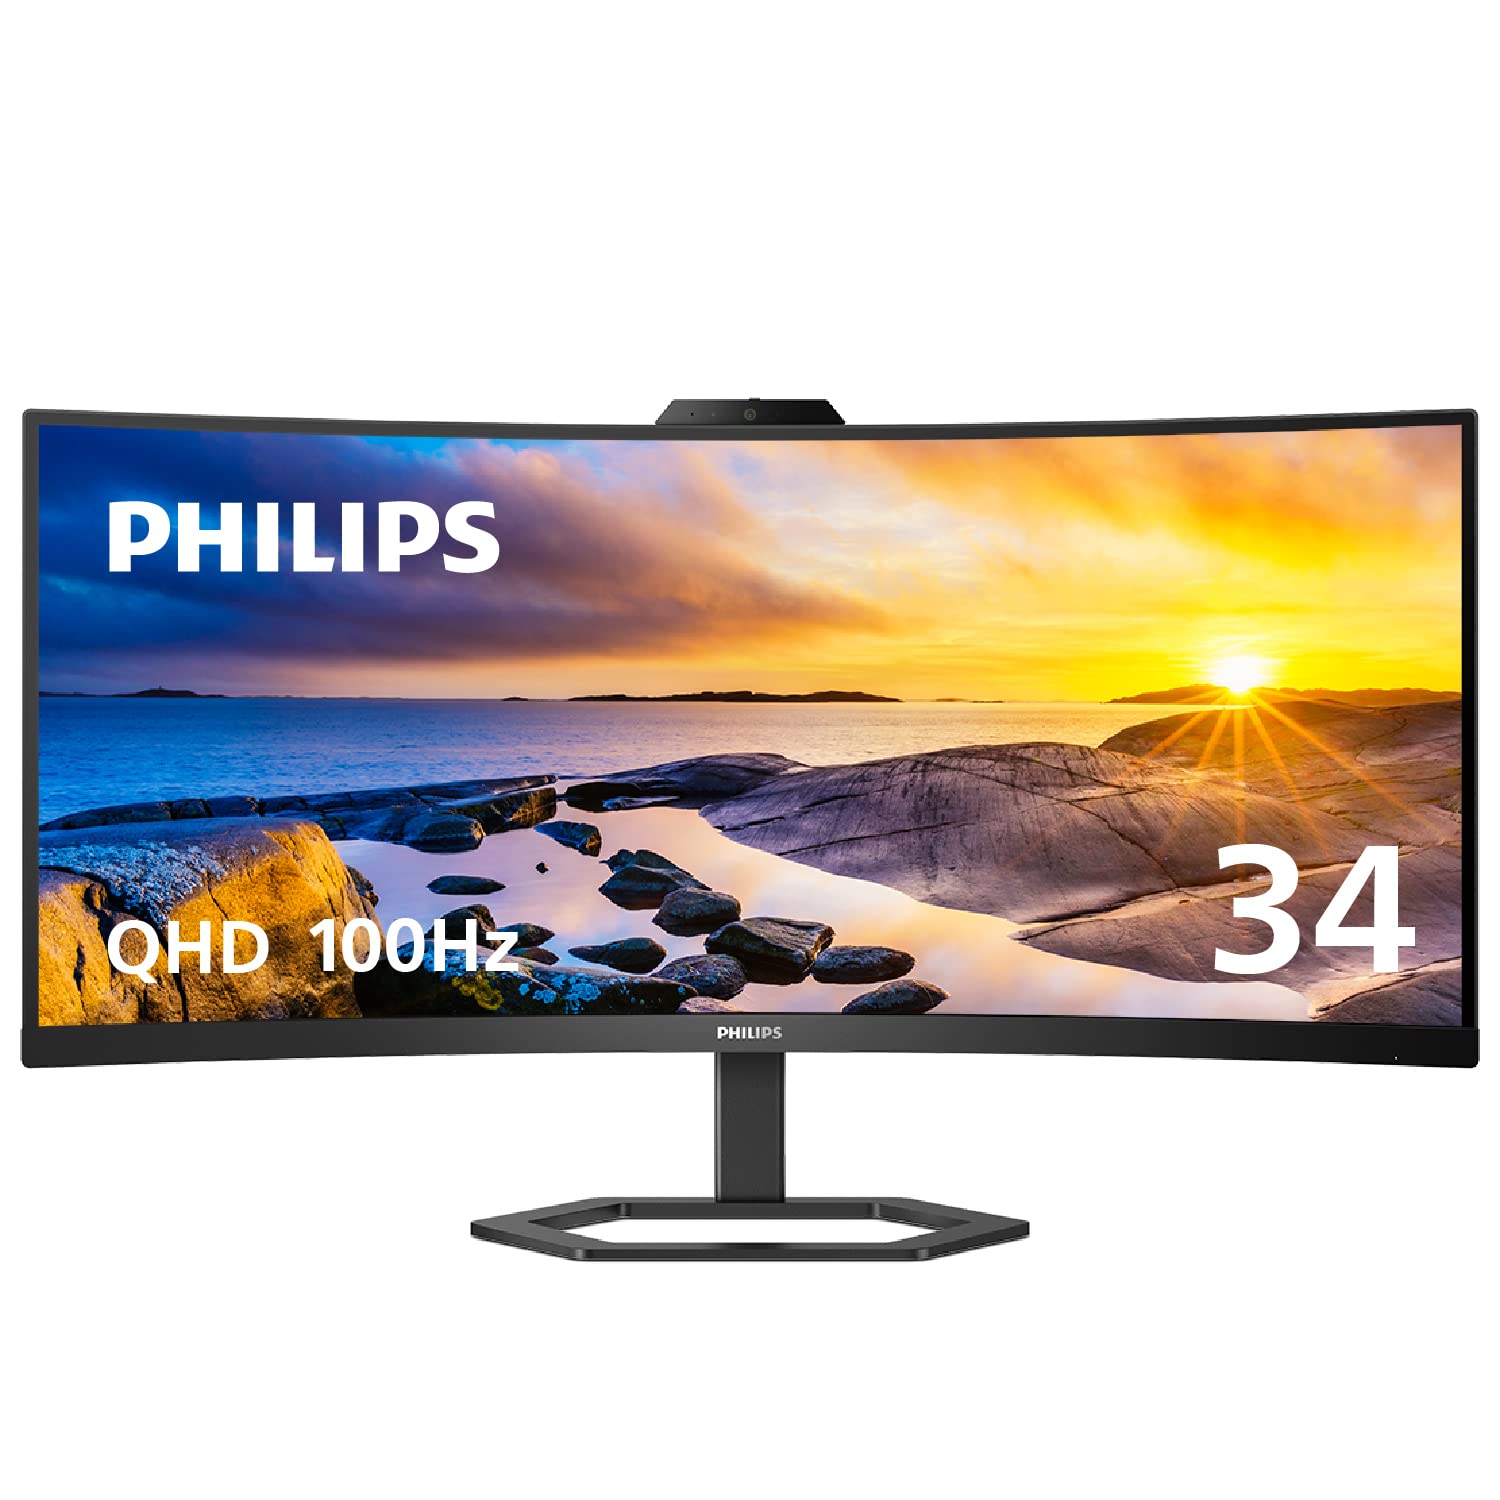 PHILIPS 34E1C5600HE 34" UltraWide QHD 21:9 Monitor with Built-in Windows Hello Webcam & Noise Canceling Mic $349